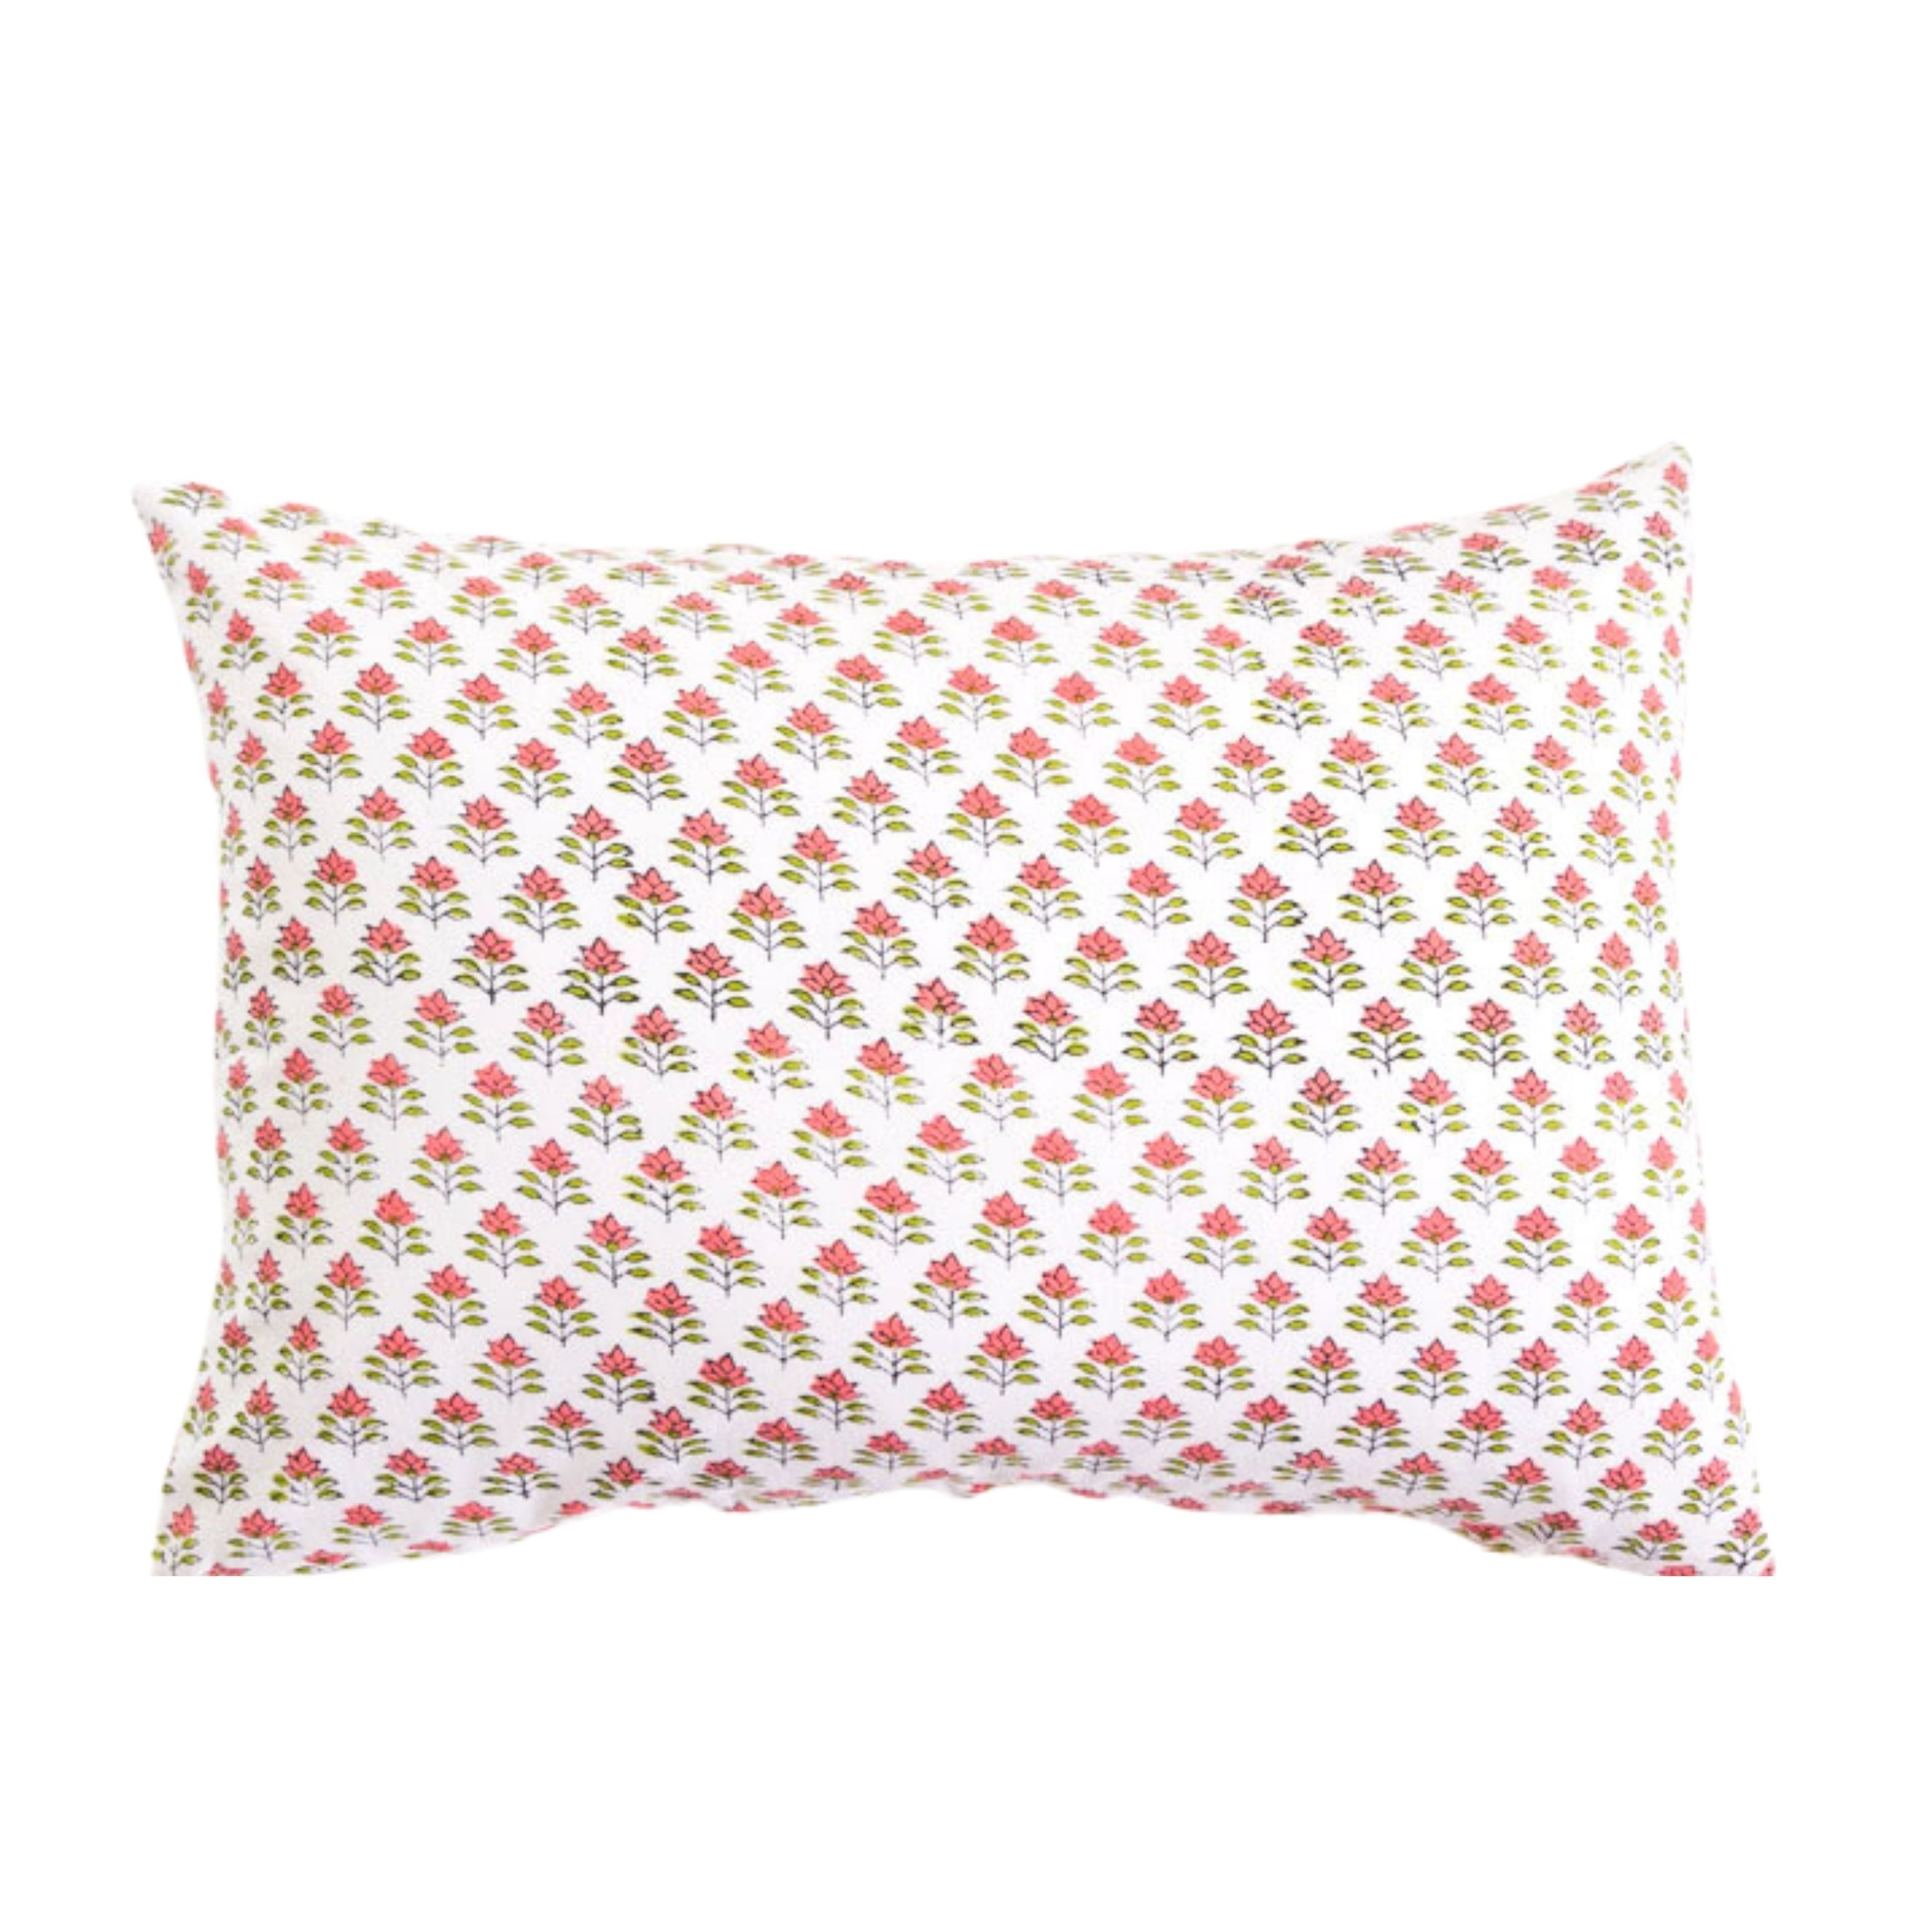 Cotton Printed Small Cushion Cover